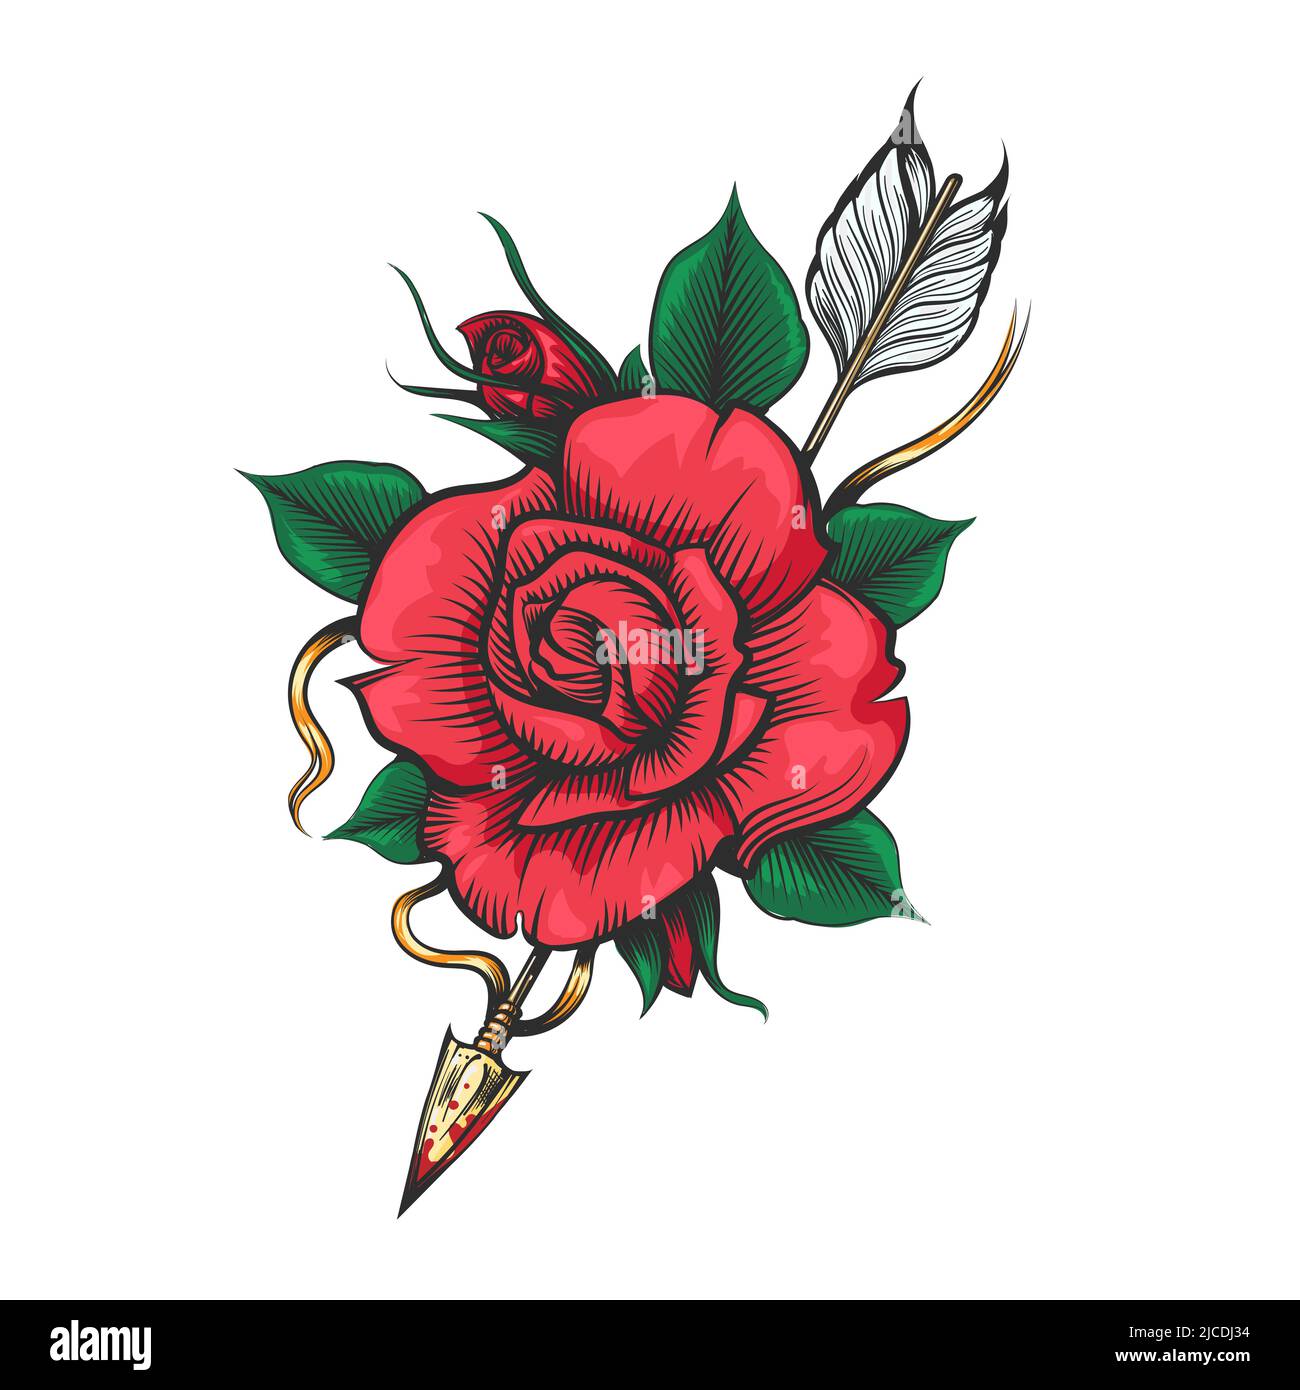 Tattoo of Rose Flower and Arrow. Love theme illustration isolated on white background. Vector illustration. Stock Vector